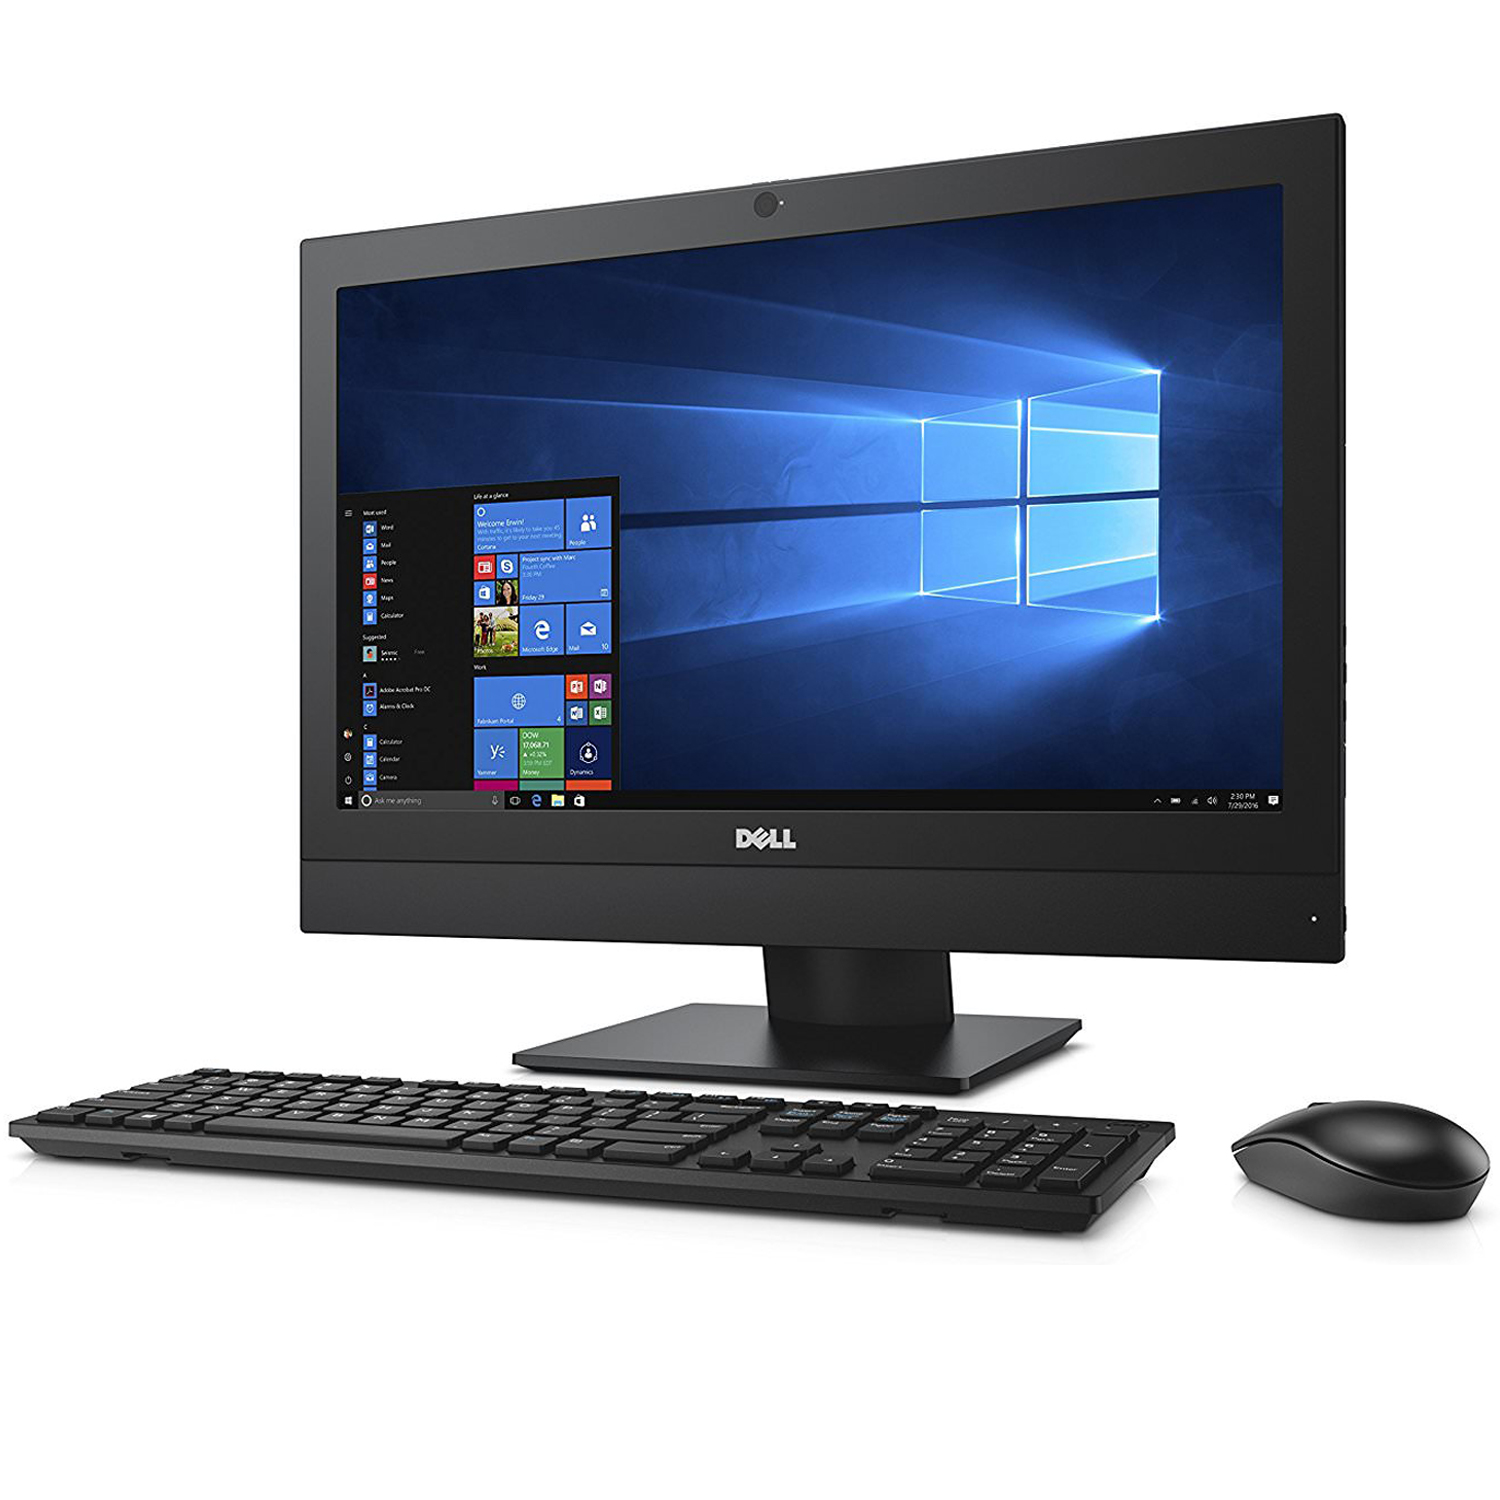 Dell Opt 5250 All In One Computer 21.5" HD Display, Intel Core i5-7500 7th Gen Processor, 16GB Memory, 256GB SSD, Windows 10 Home, HDMI, Displayport, Black, 1 Year Warranty (Used, Like New) - image 4 of 6